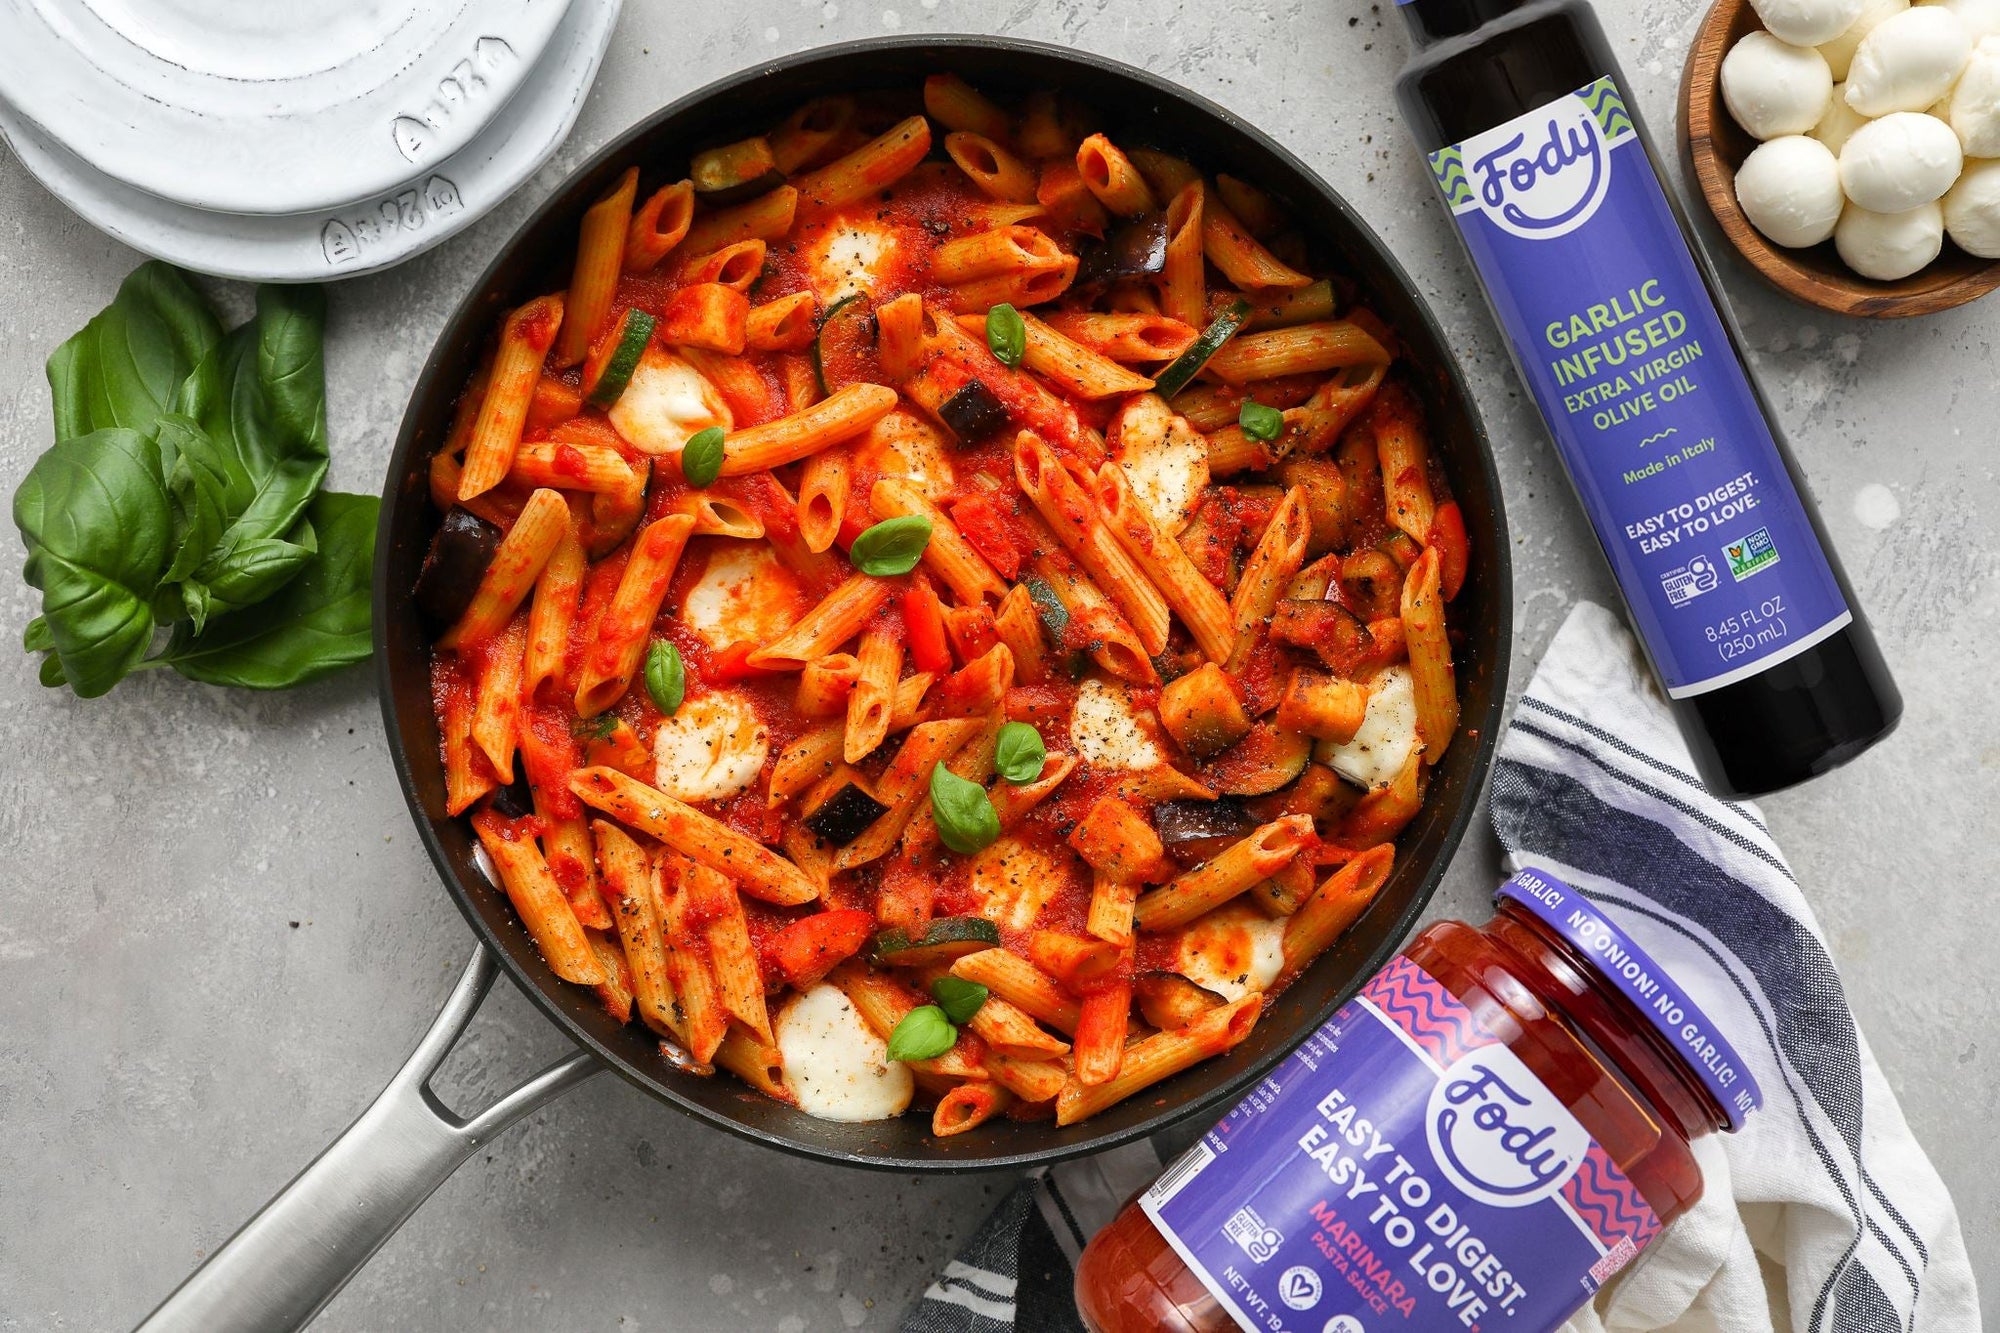 An image of the perfect cheesy vegetarian pasta: Fody's Loaded Veggie Pasta with Mozzarella, tossed in red sauce, is displayed in a pan next to two jars of sauce, fresh mozzarella balls and fresh basil leaves.